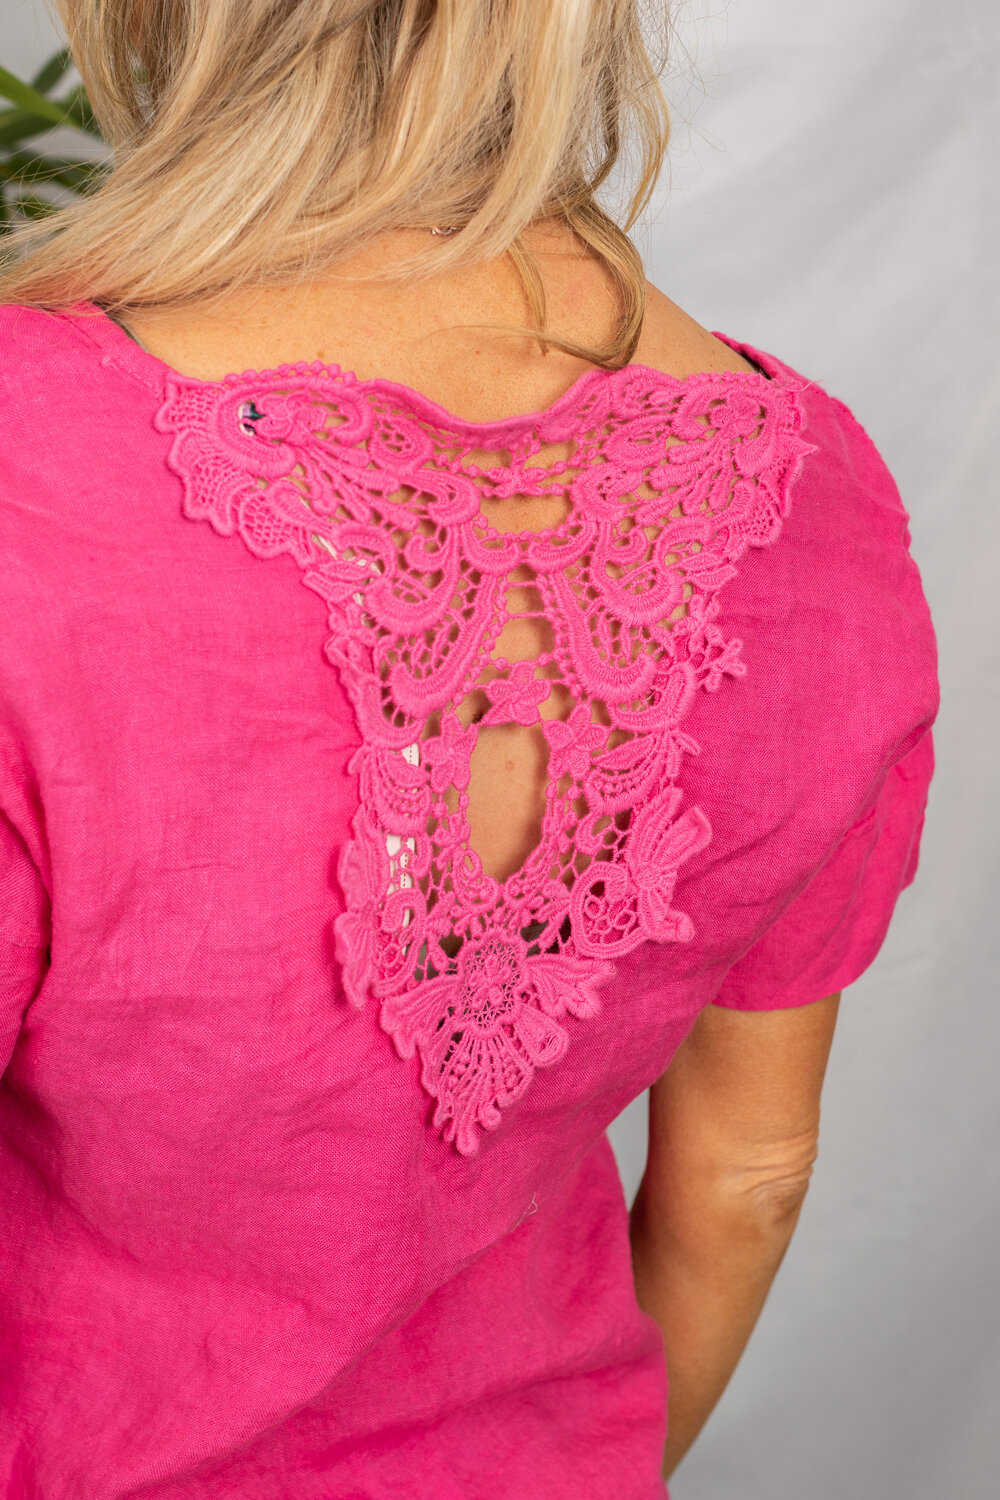 Tyra linen top - lace back - cerise